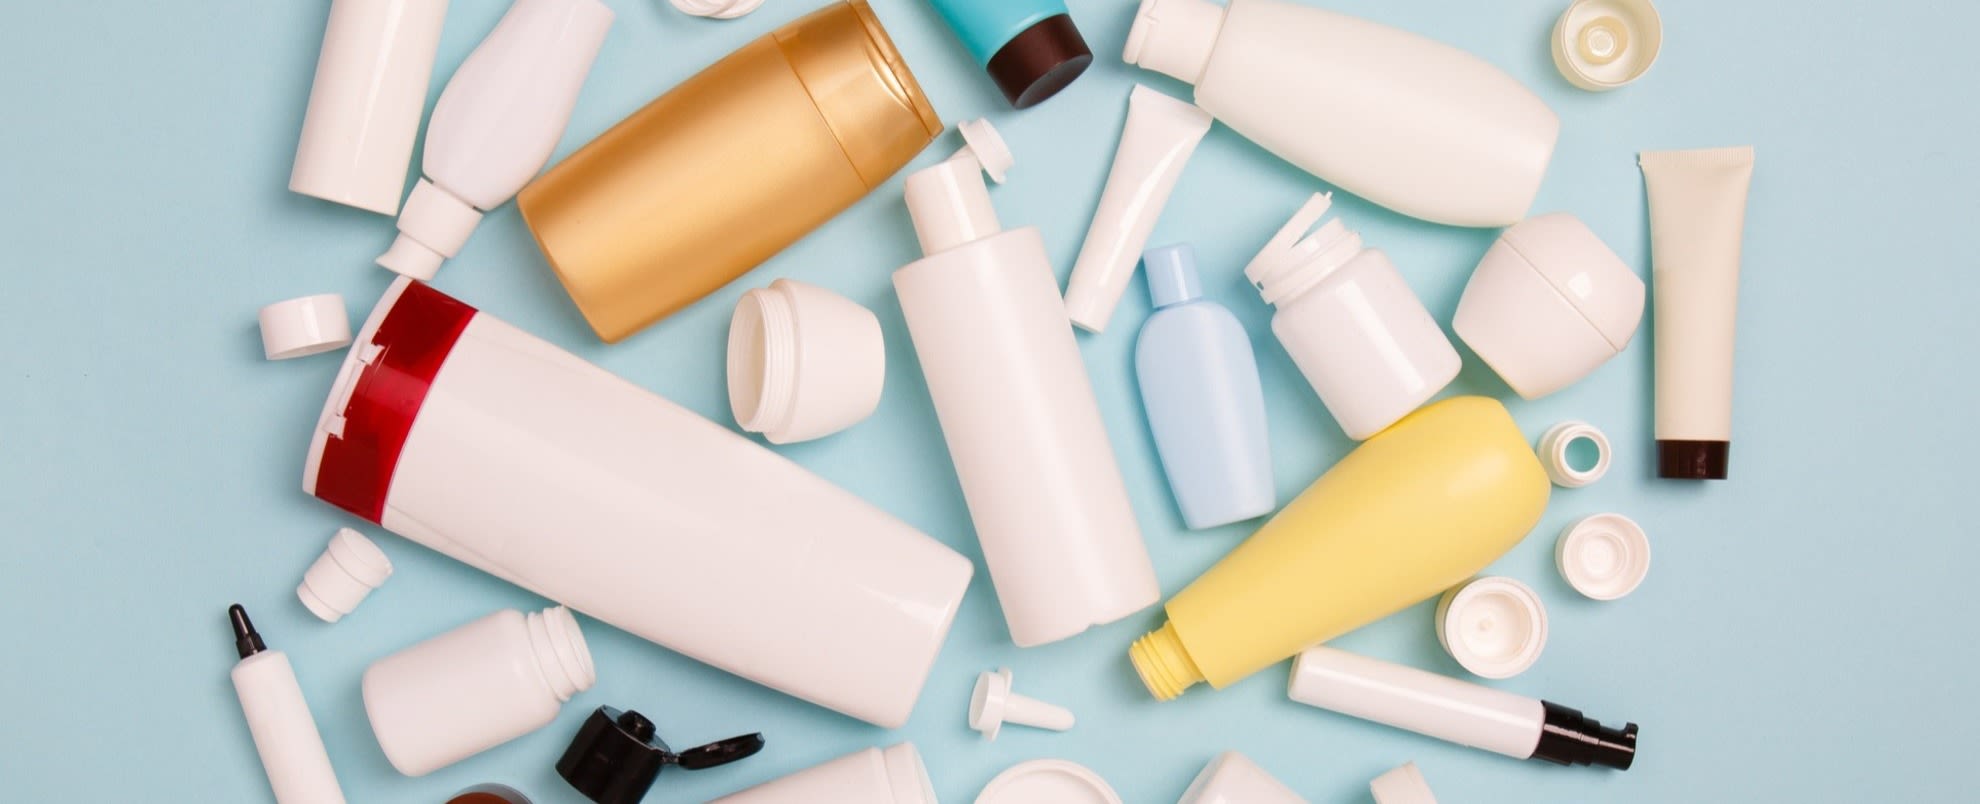 Separate collection of sorted HDPE bottles from cosmetics for recycling. 